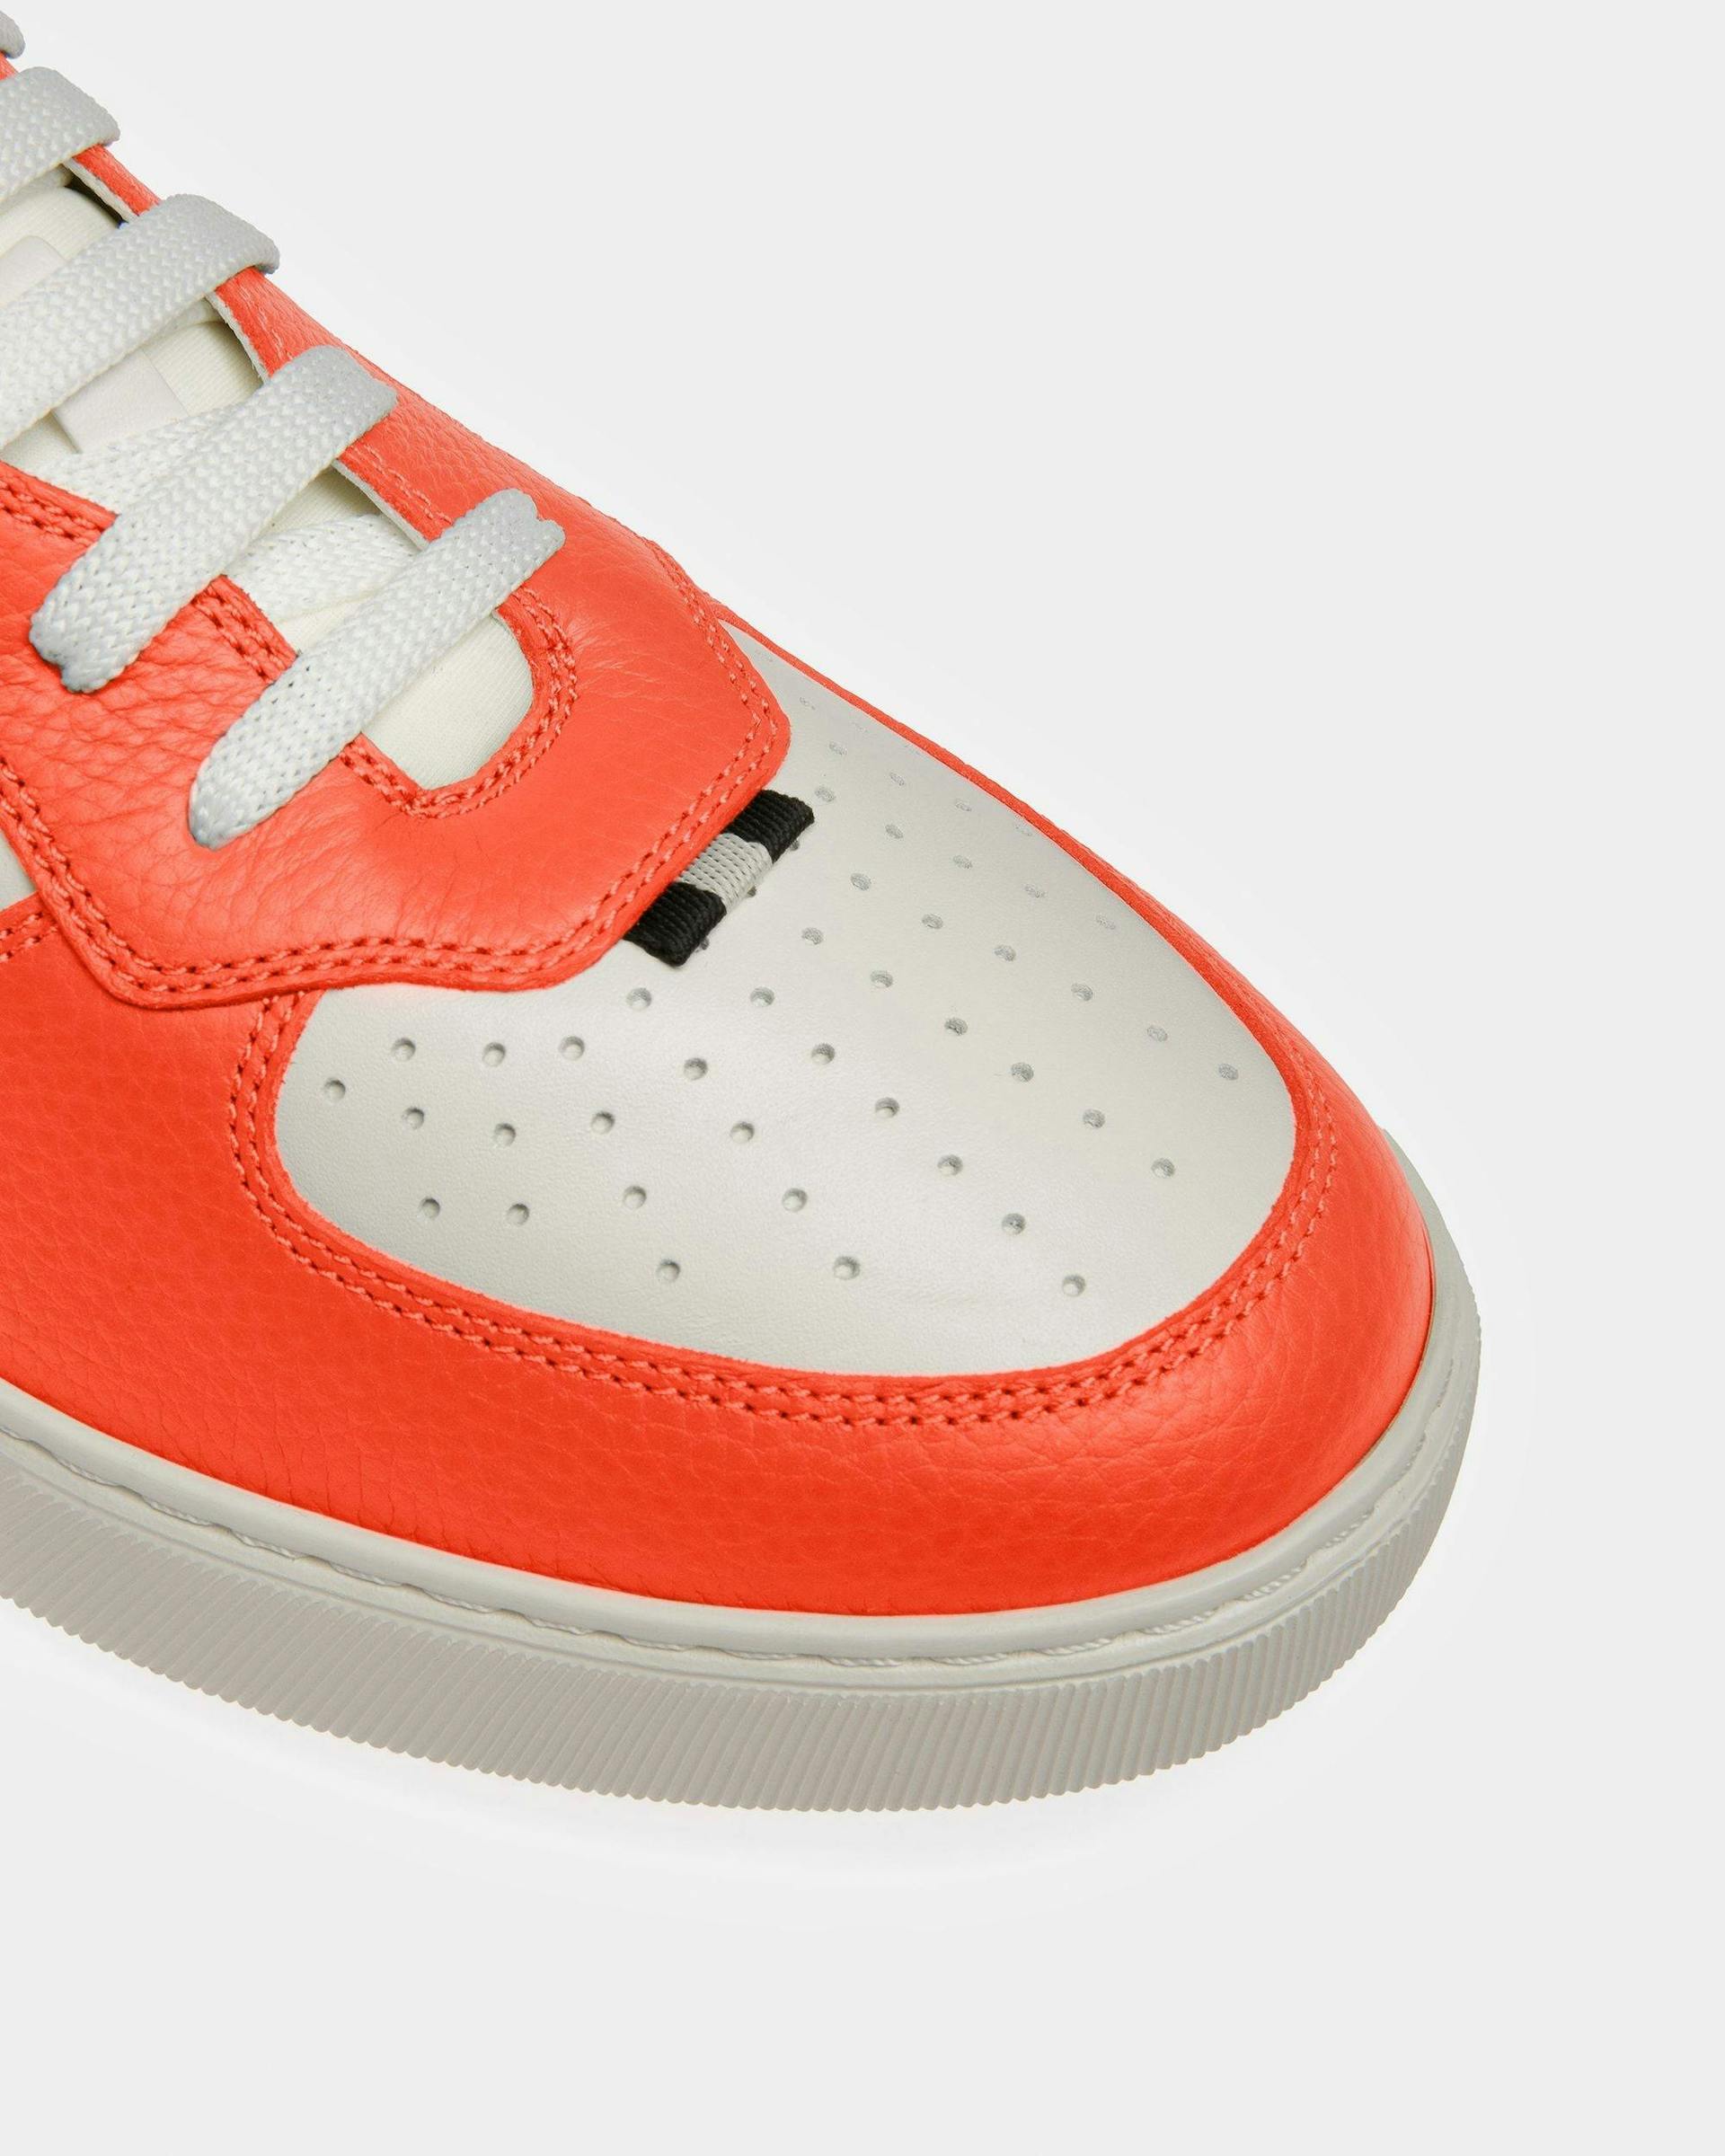 Mark Leather Sneakers In Orange And White - Men's - Bally - 06